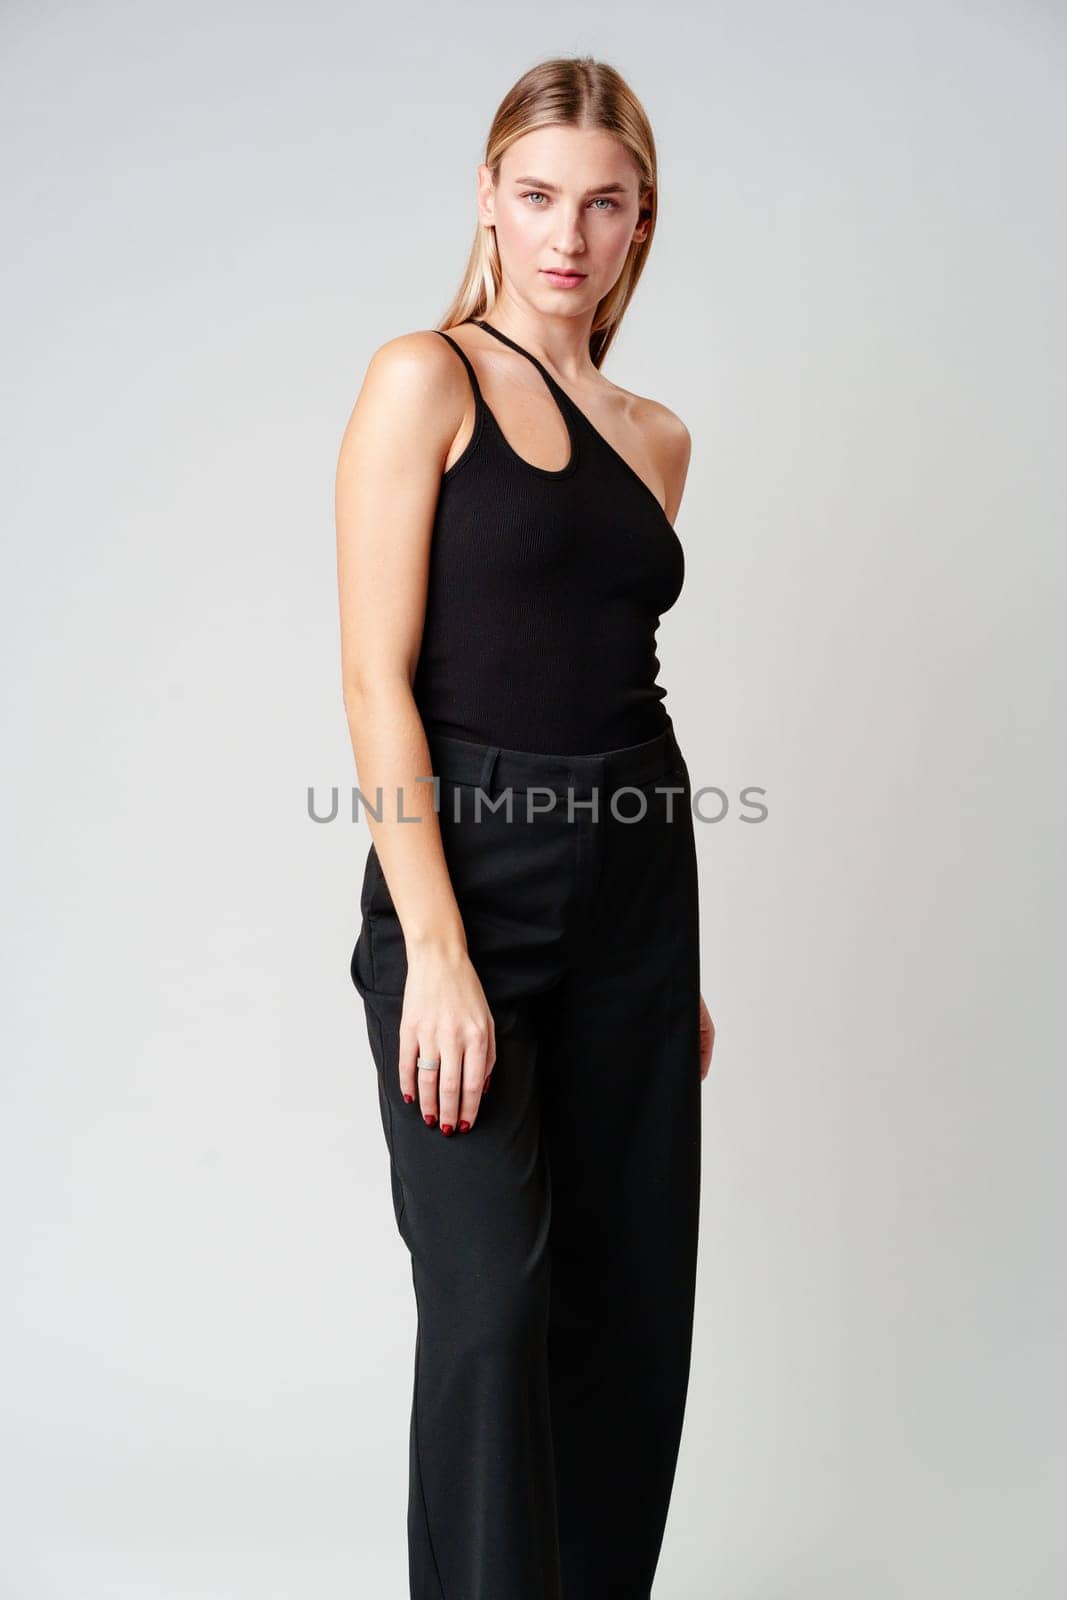 Young Woman Model in Black Top and Pants Posing on gray background in studio